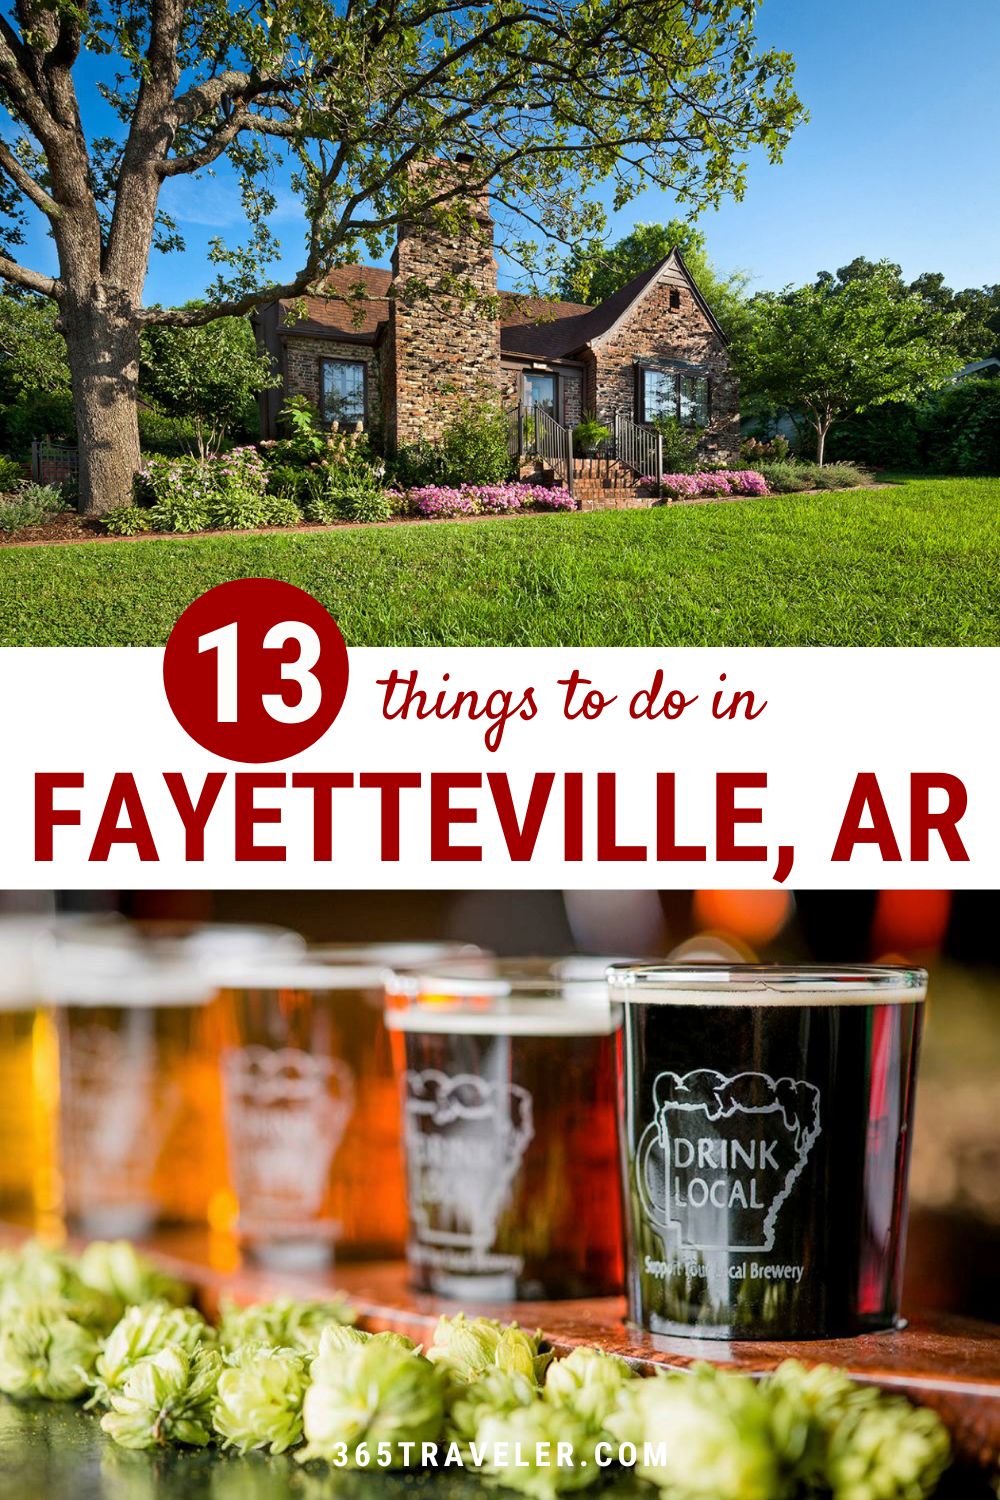 13 Awesome & Fun Things To Do in Fayetteville Ar